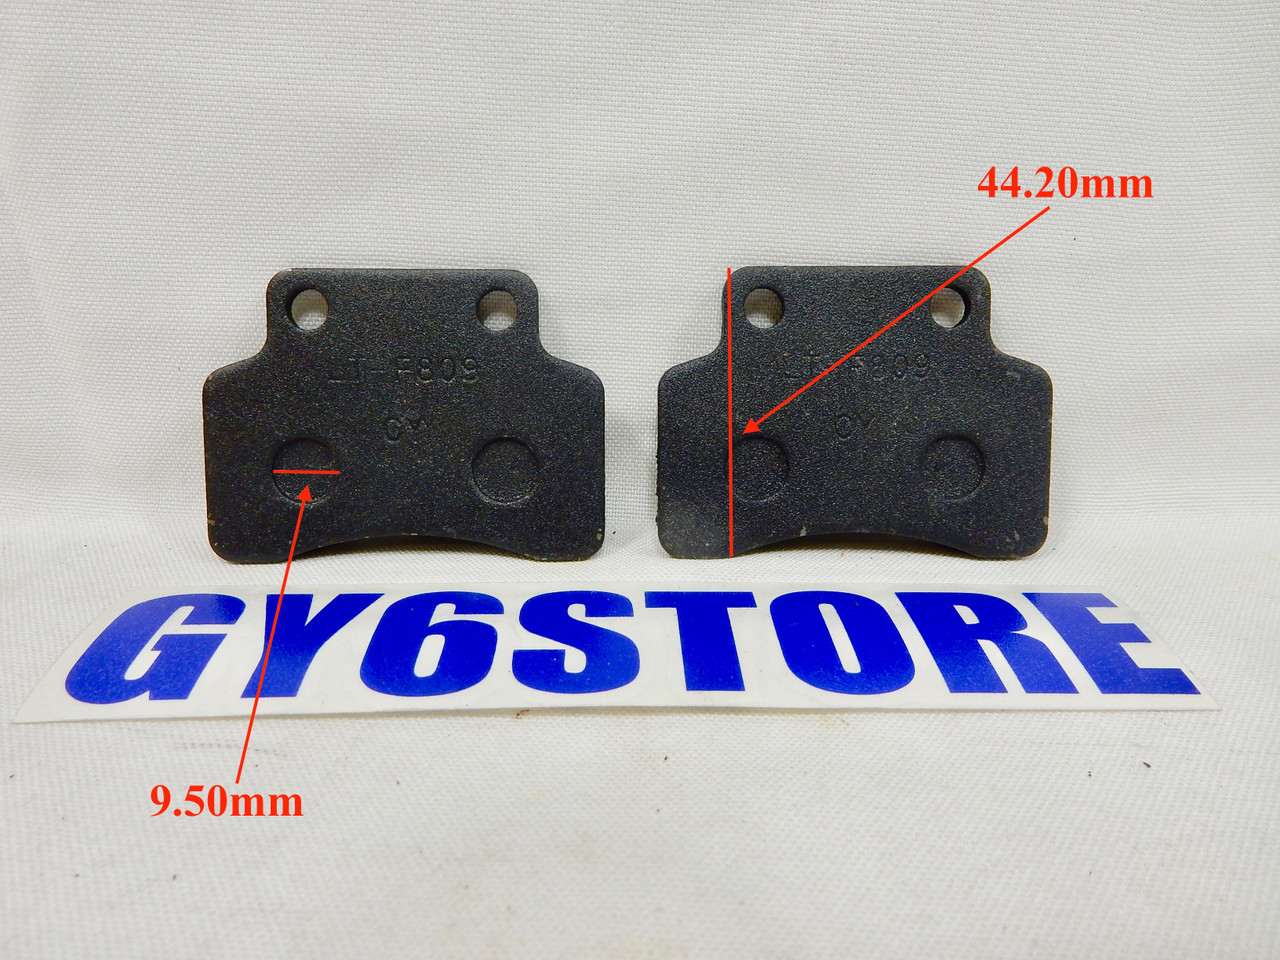 DISC BRAKE PAD SET FOR 50cc QMB139 AND 150cc GY6 SCOOTERS ATV BIKE (TYPE 10)